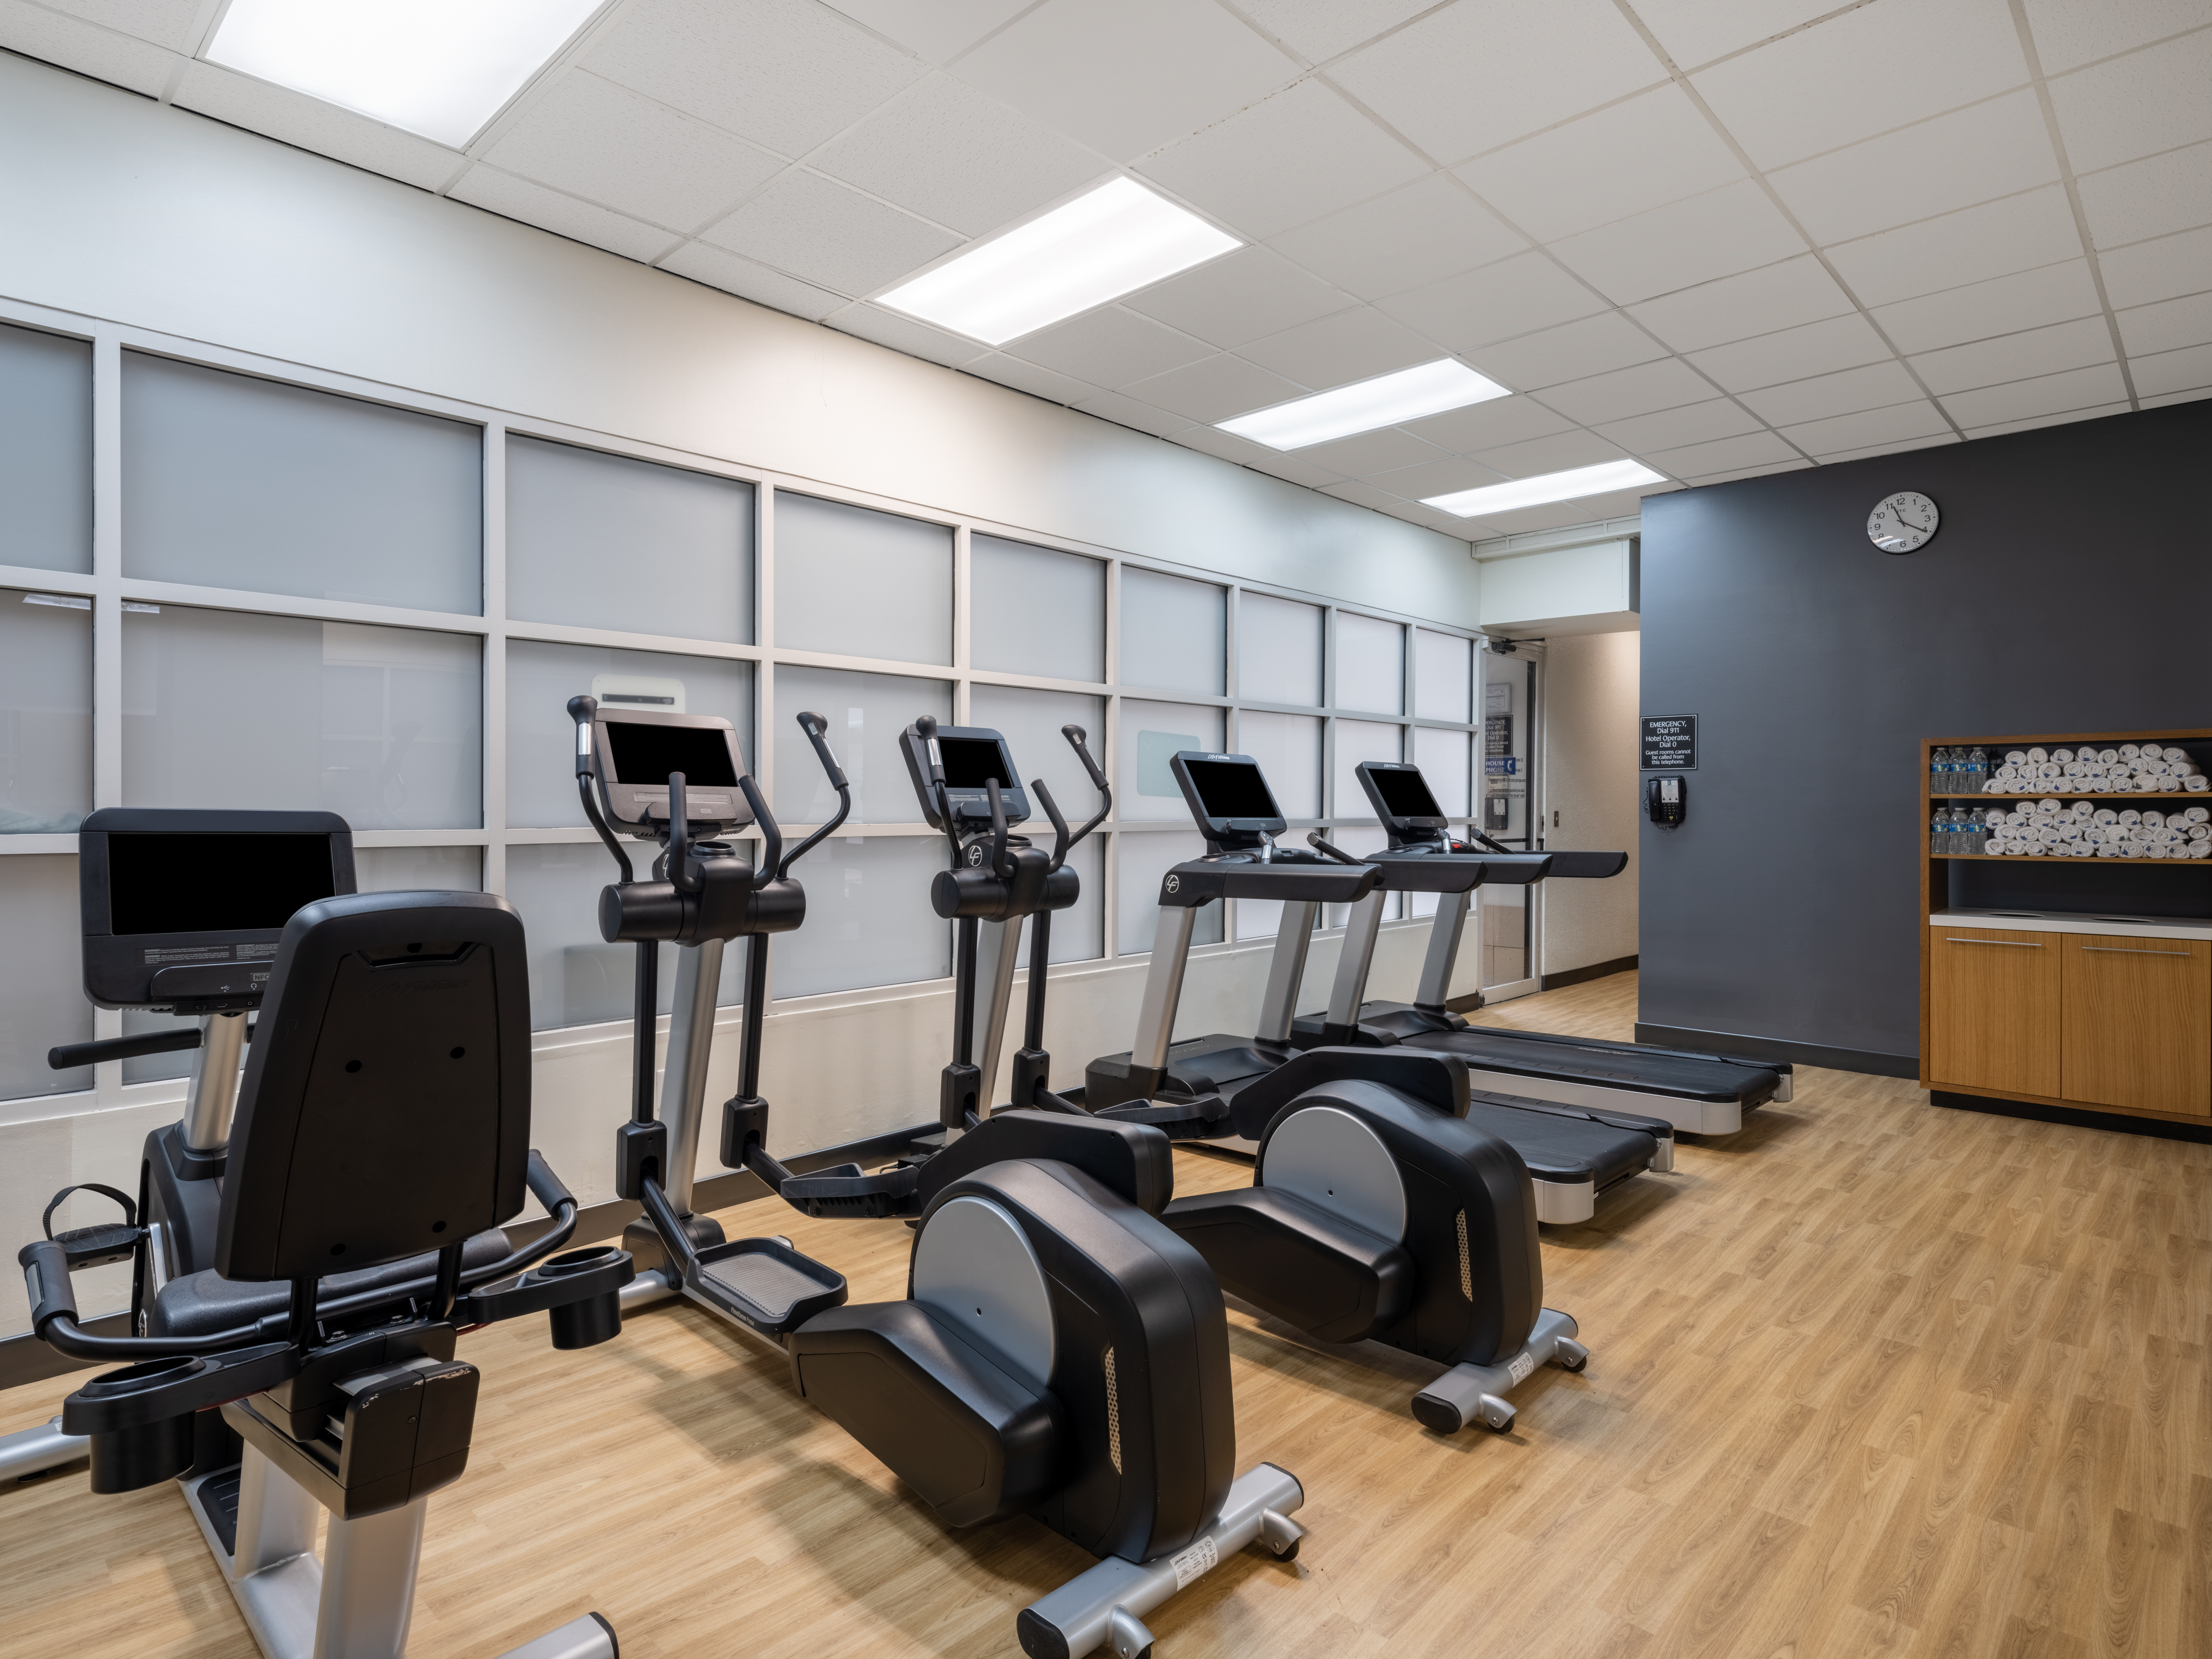 Our fitness center is perfect for a great workout anytime.